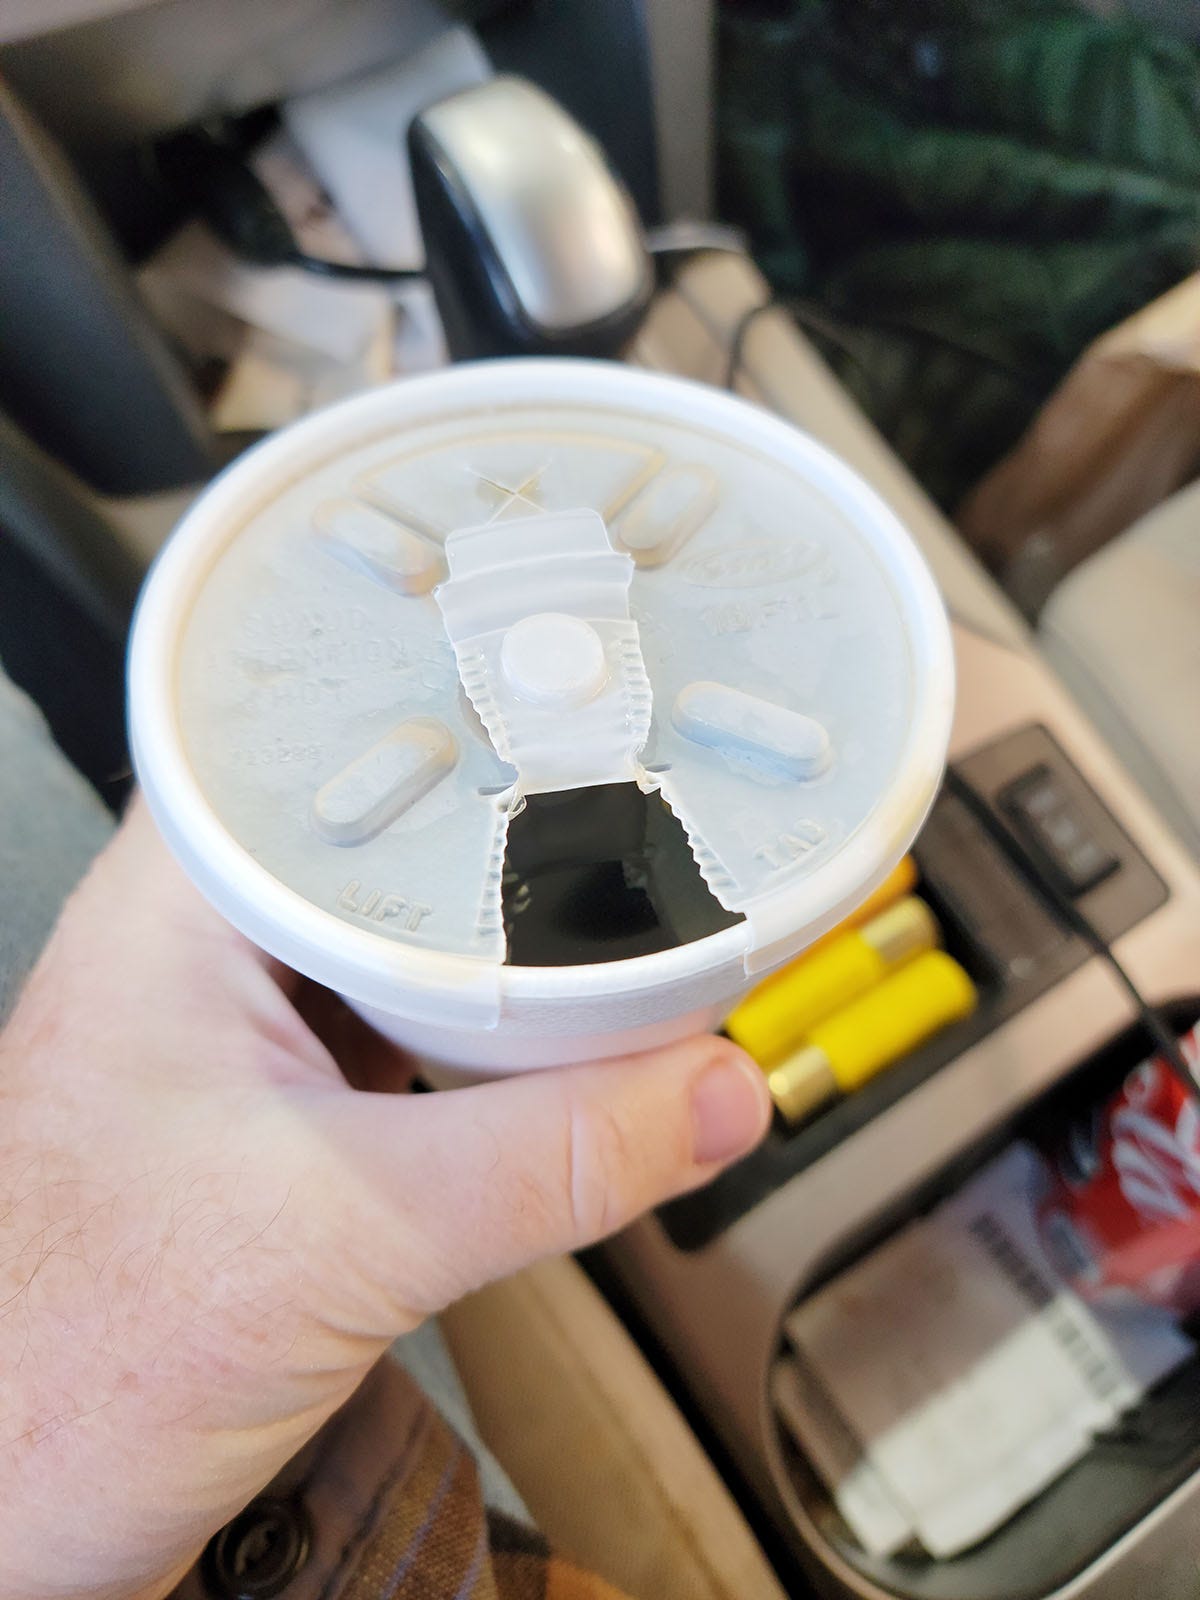 The worst cup of coffee ever. 